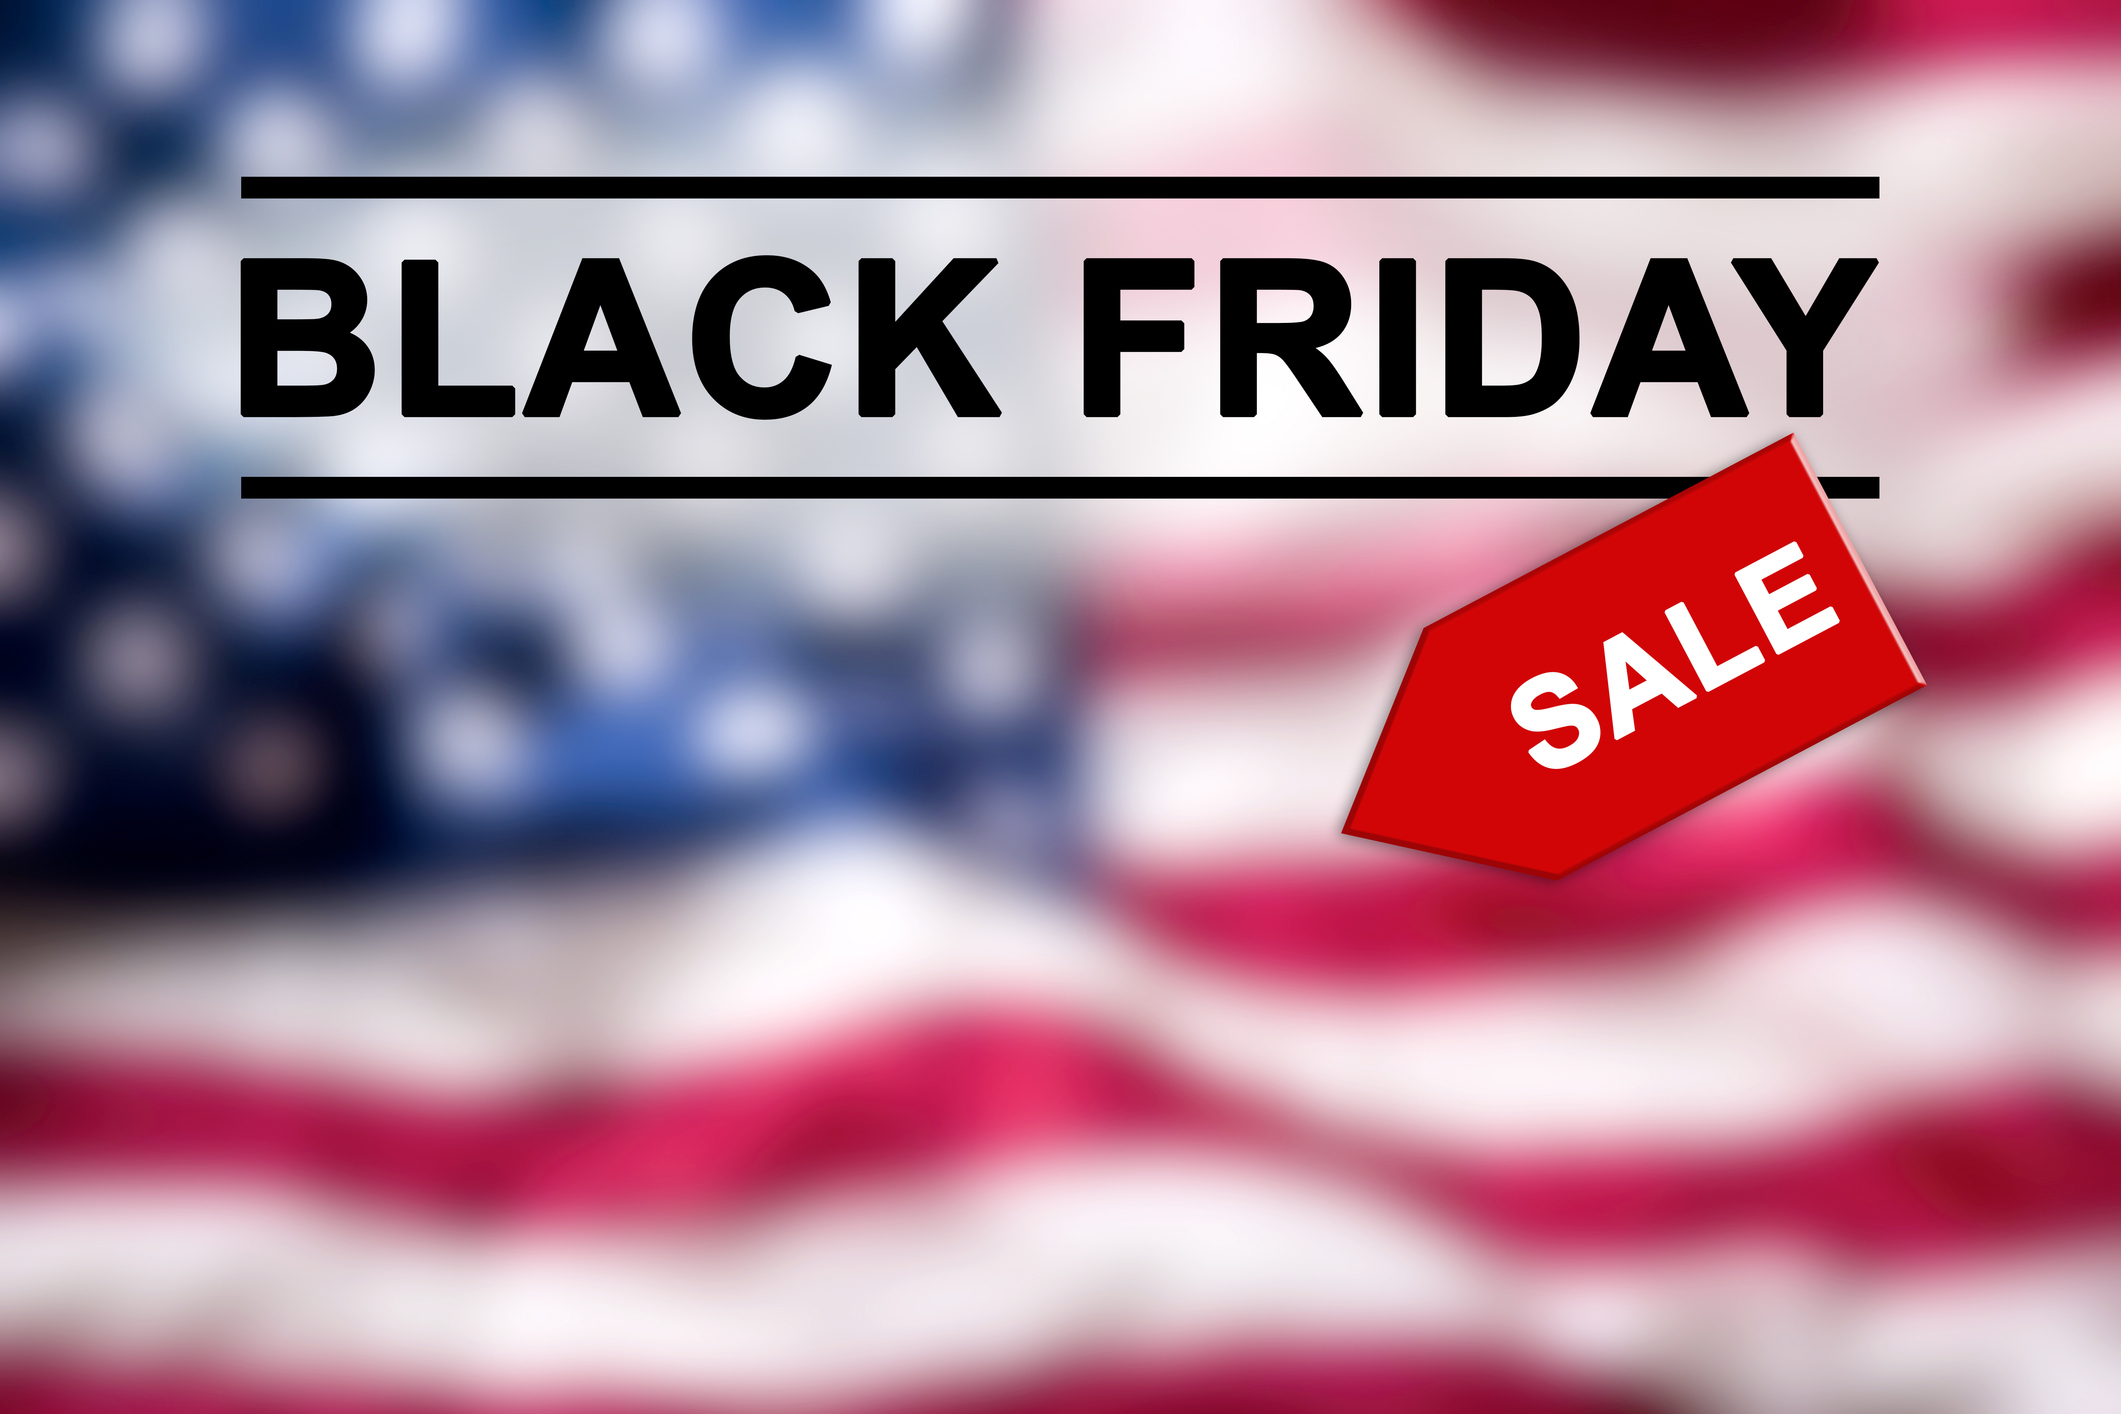 Black Friday sale text on blurred USA flag